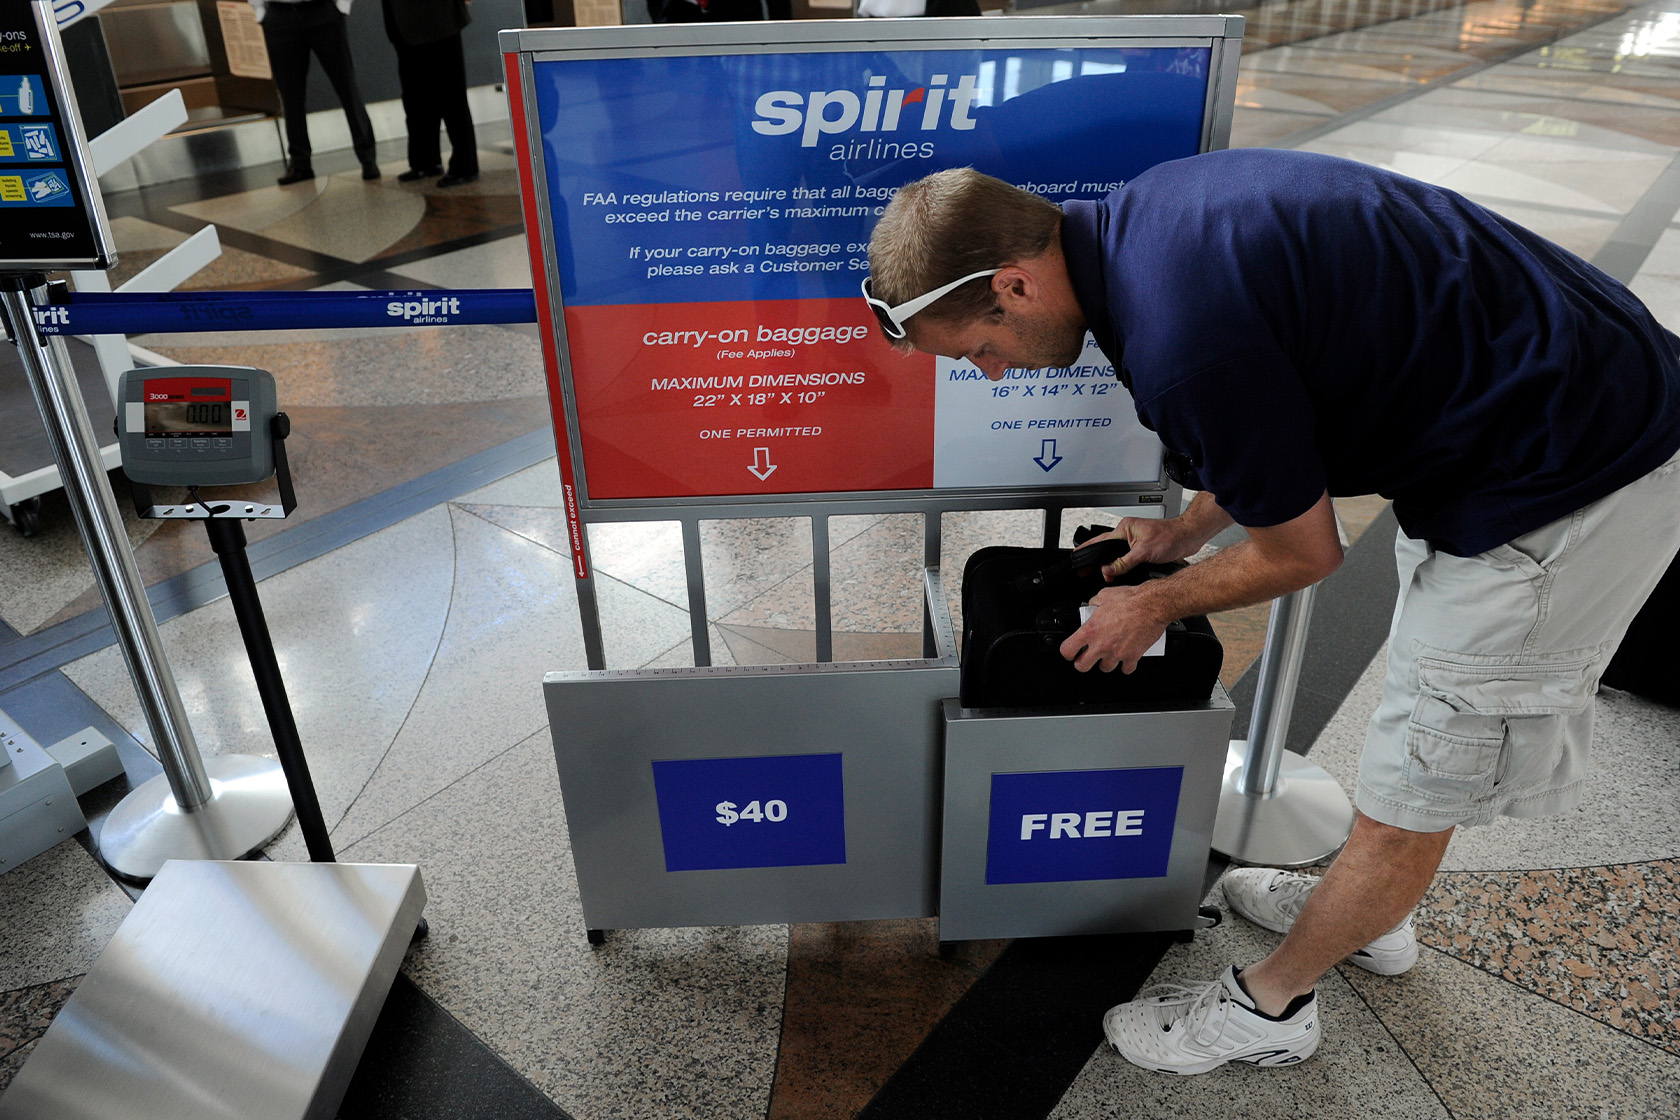 What is Spirit Airlines carry-on bag size limit?